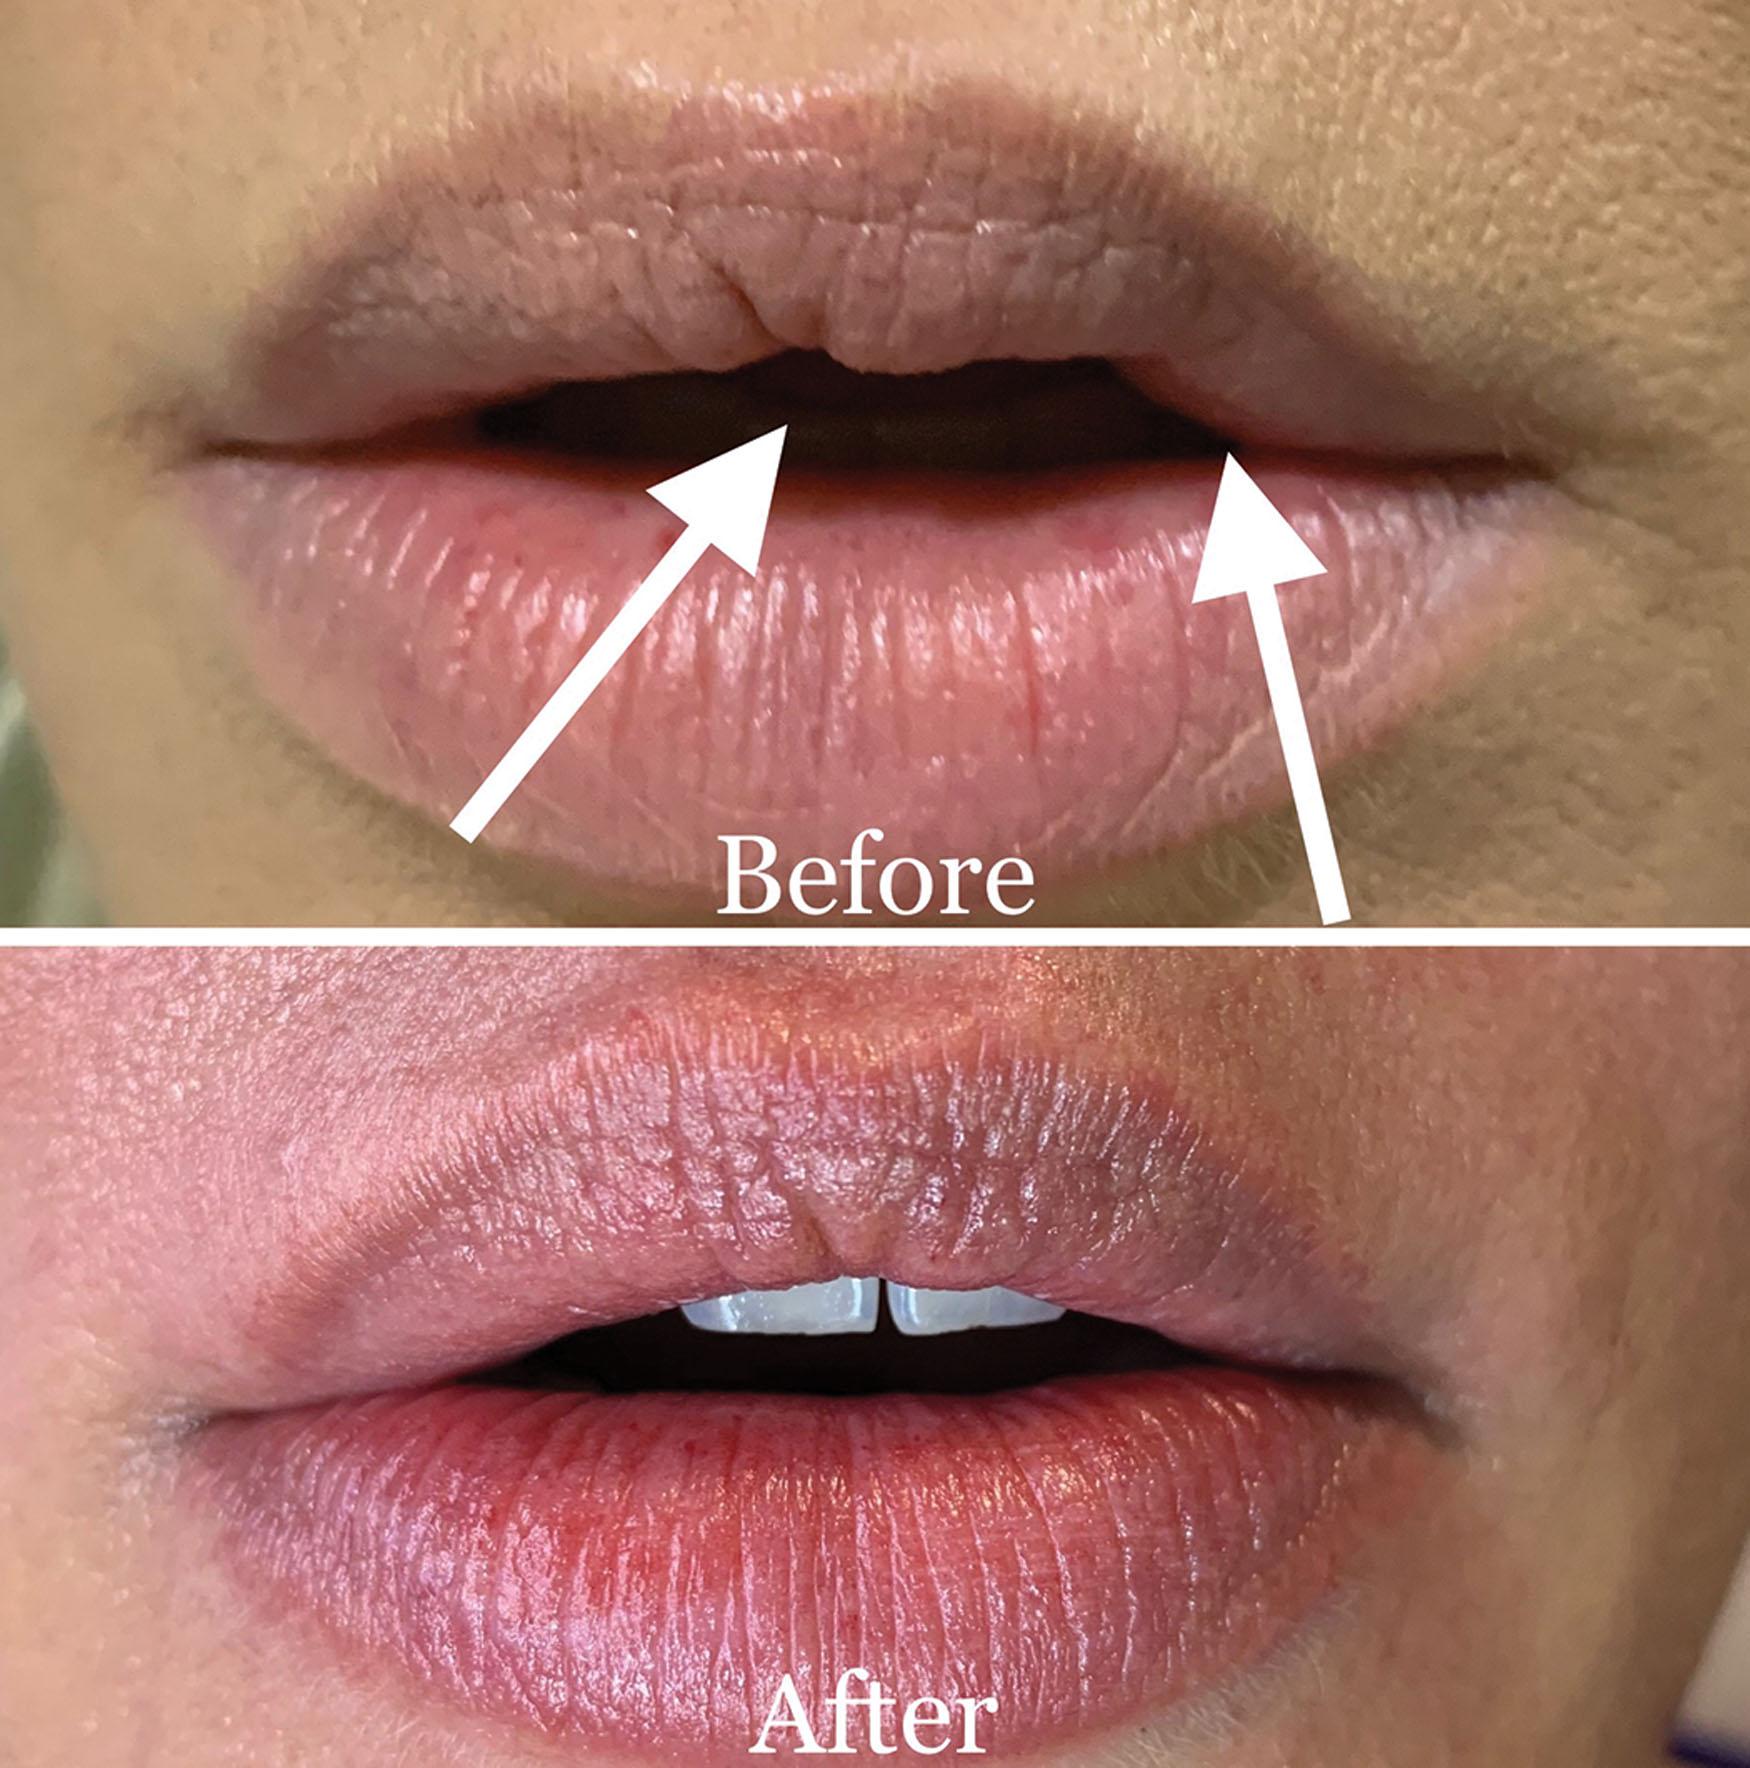 Fig. 10.43, This patient was injected with poor technique by another doctor (top) and retreated after dissolving all existing filler and performing proper injection techniques (bottom) .